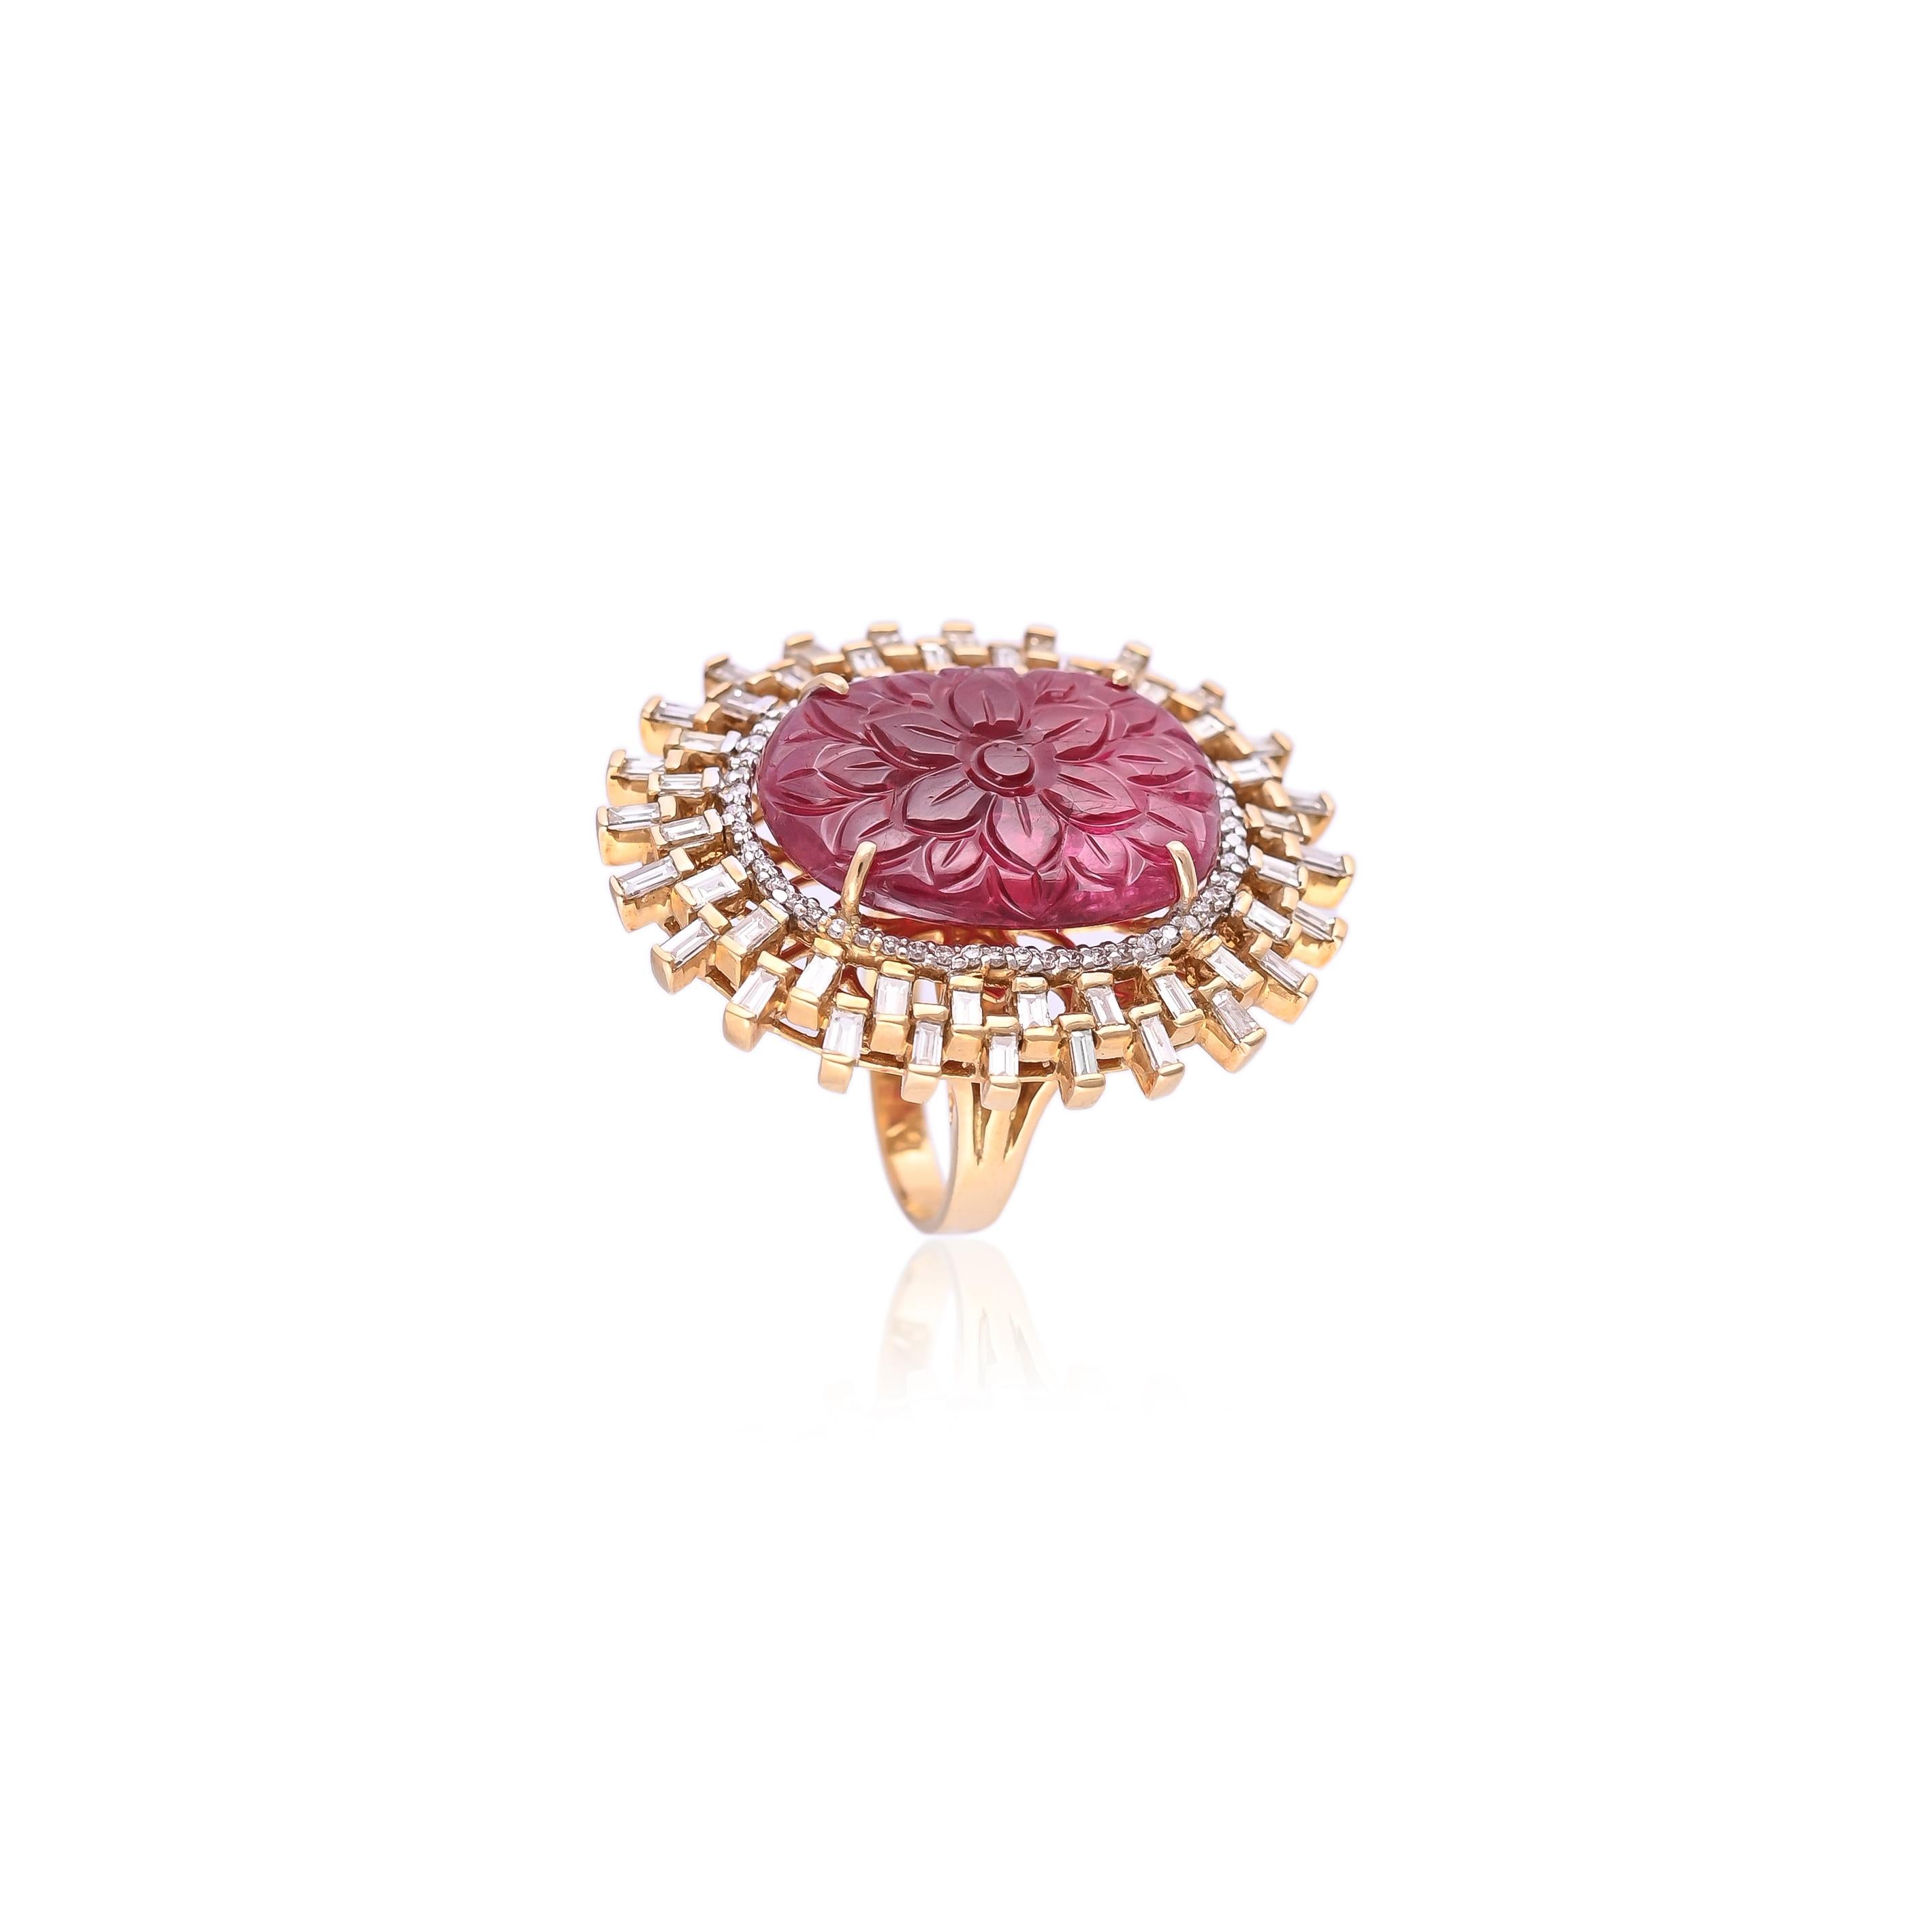 Natural Burma Spinel Ring Set in 18 Karat Gold with Diamonds For Sale 3